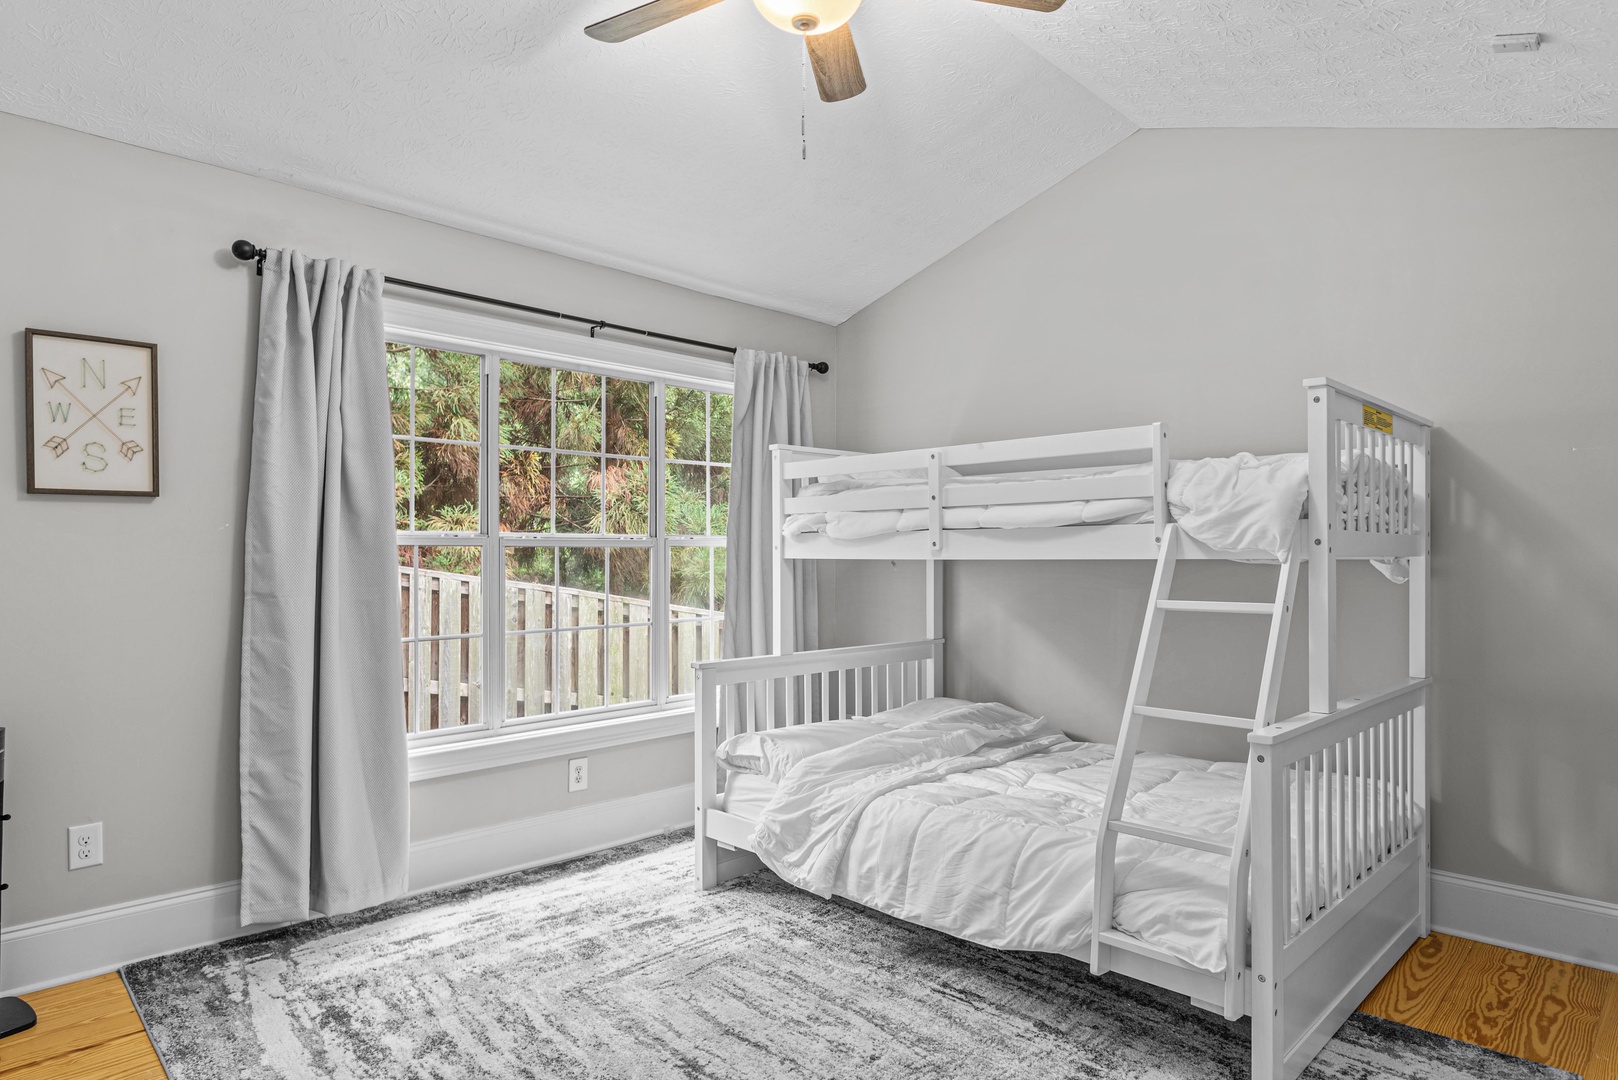 The second bedroom offers a twin-over-full bunkbed & ceiling fan